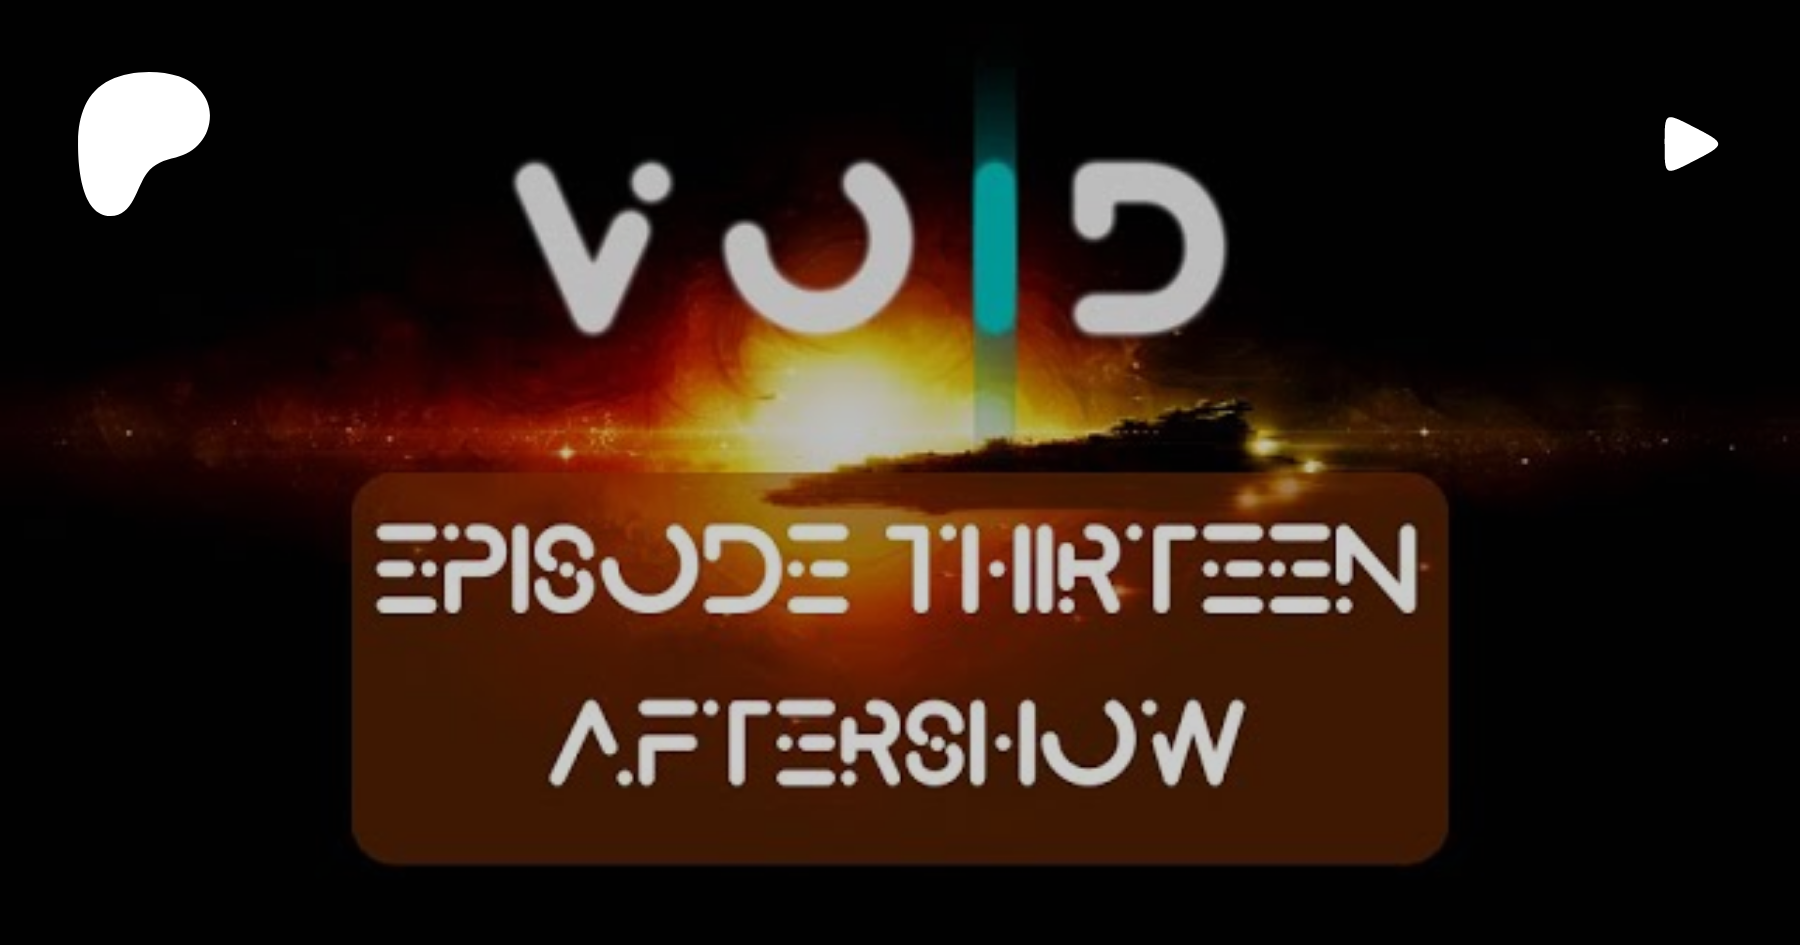 Coriolis Void Episode 13 Aftershow Unmadegaming On Patreon